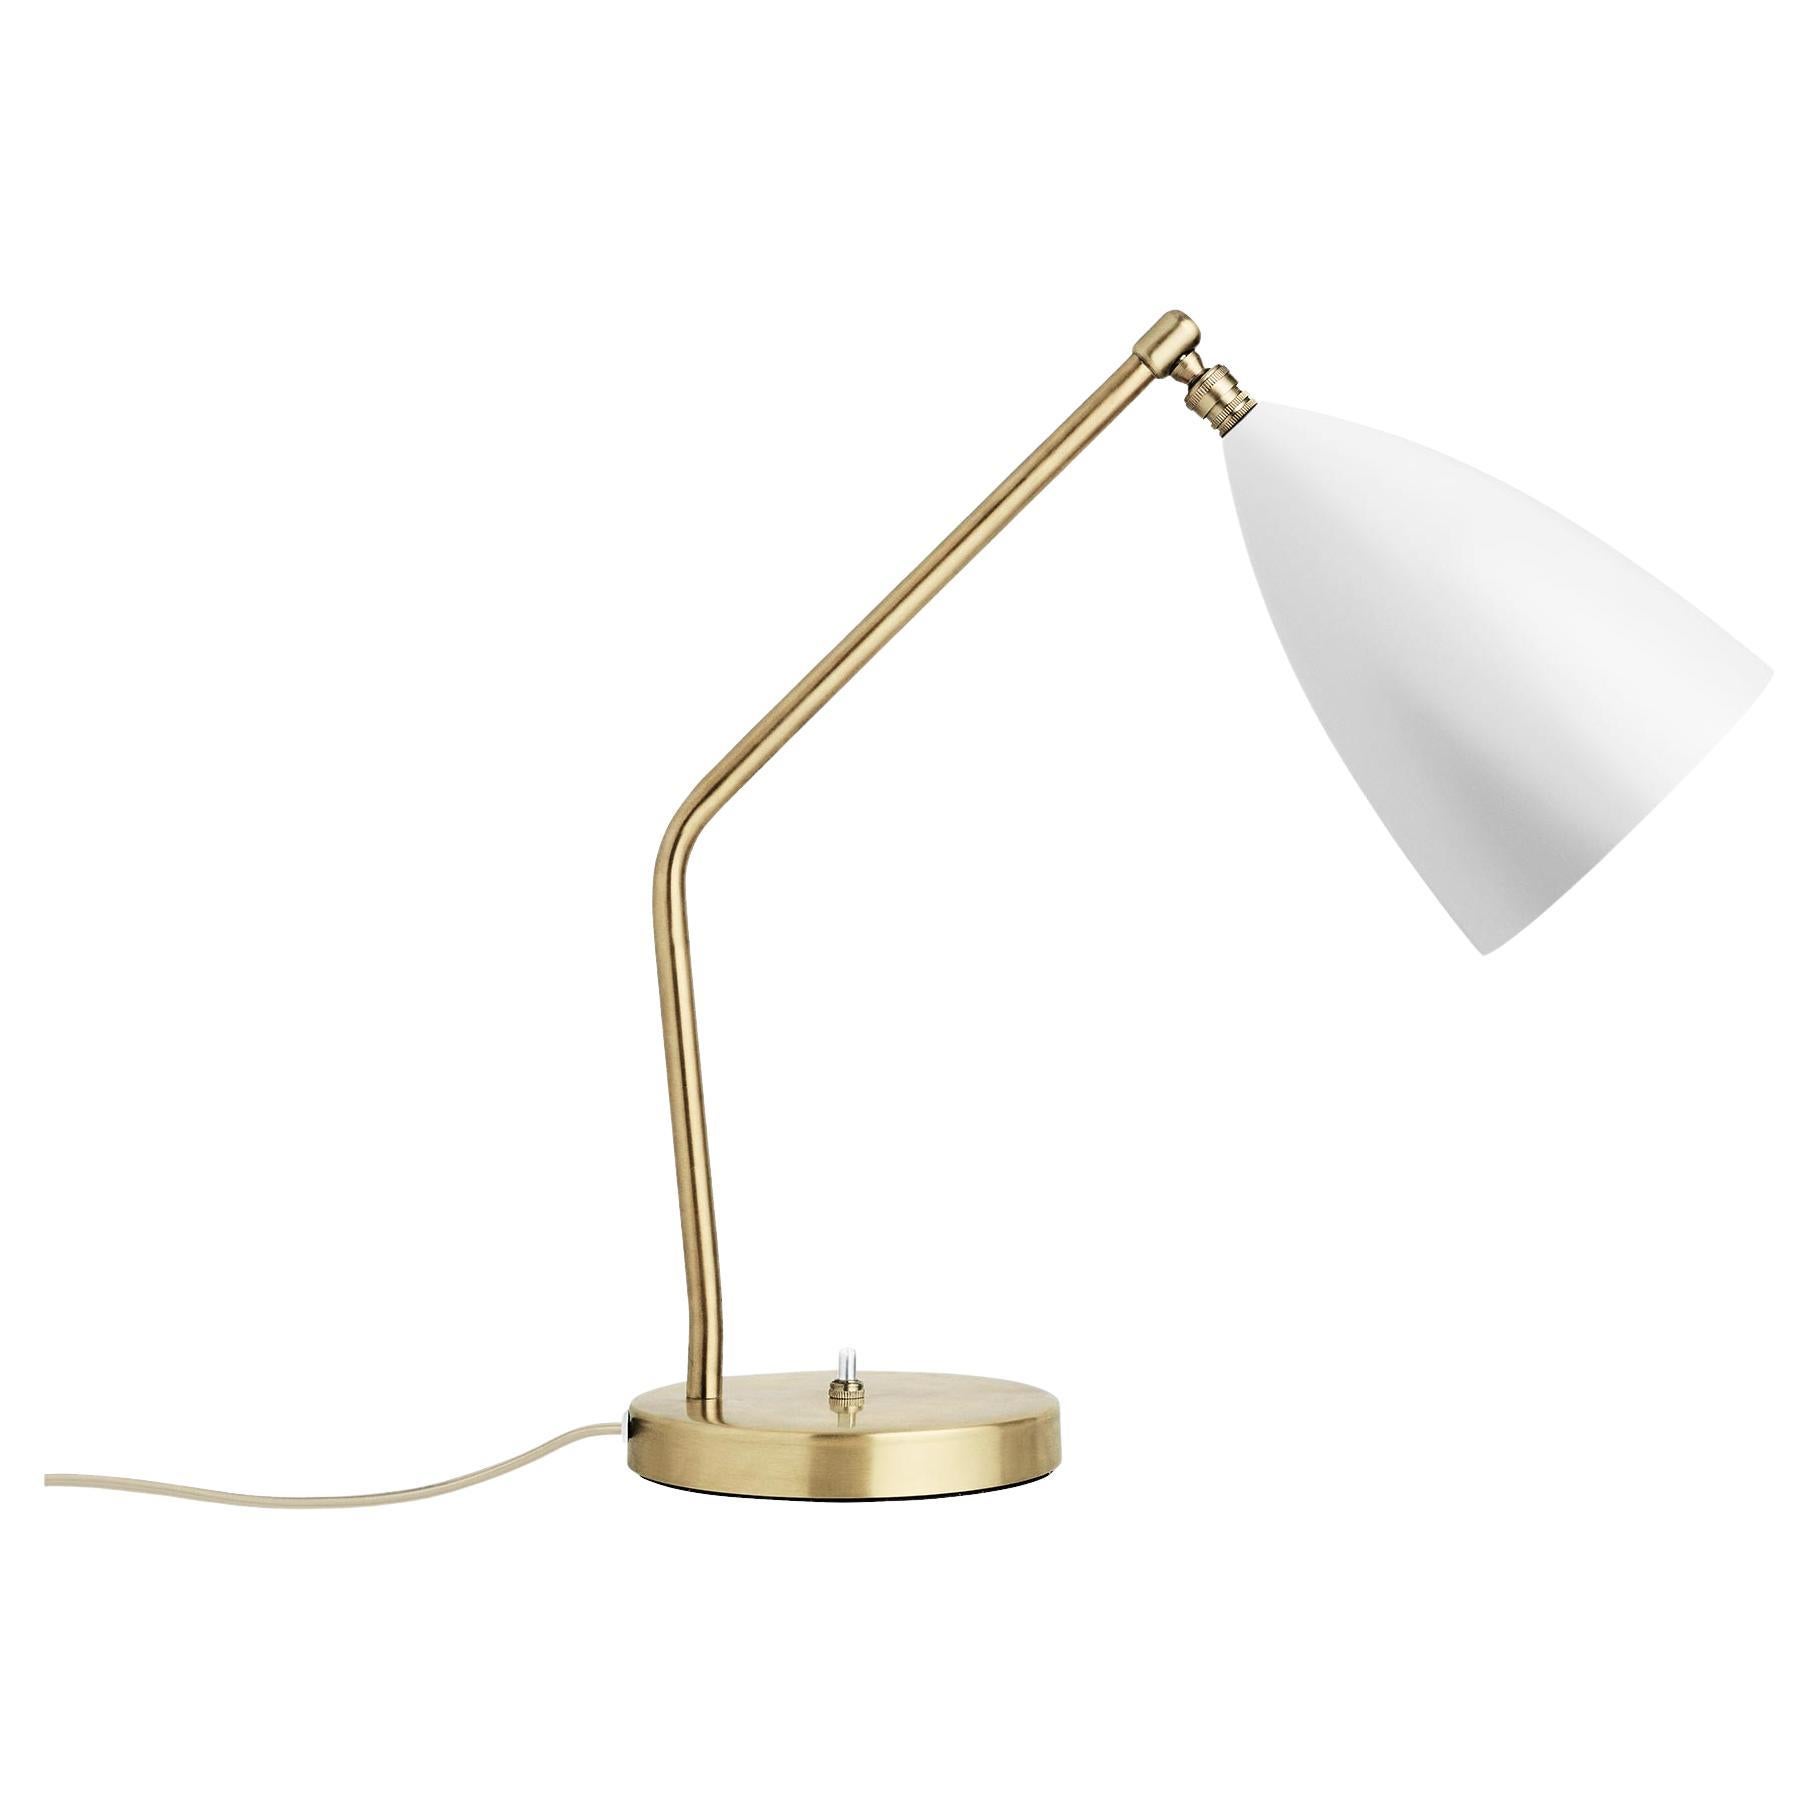 Greta M. Grossman designed the iconic Gräshoppa table lamp in 1947 and with its sophisticated yet playful design, it is still as relevant today. The distinctive, elongated conical shade is beautifully combined with a tubular brass stand, a great